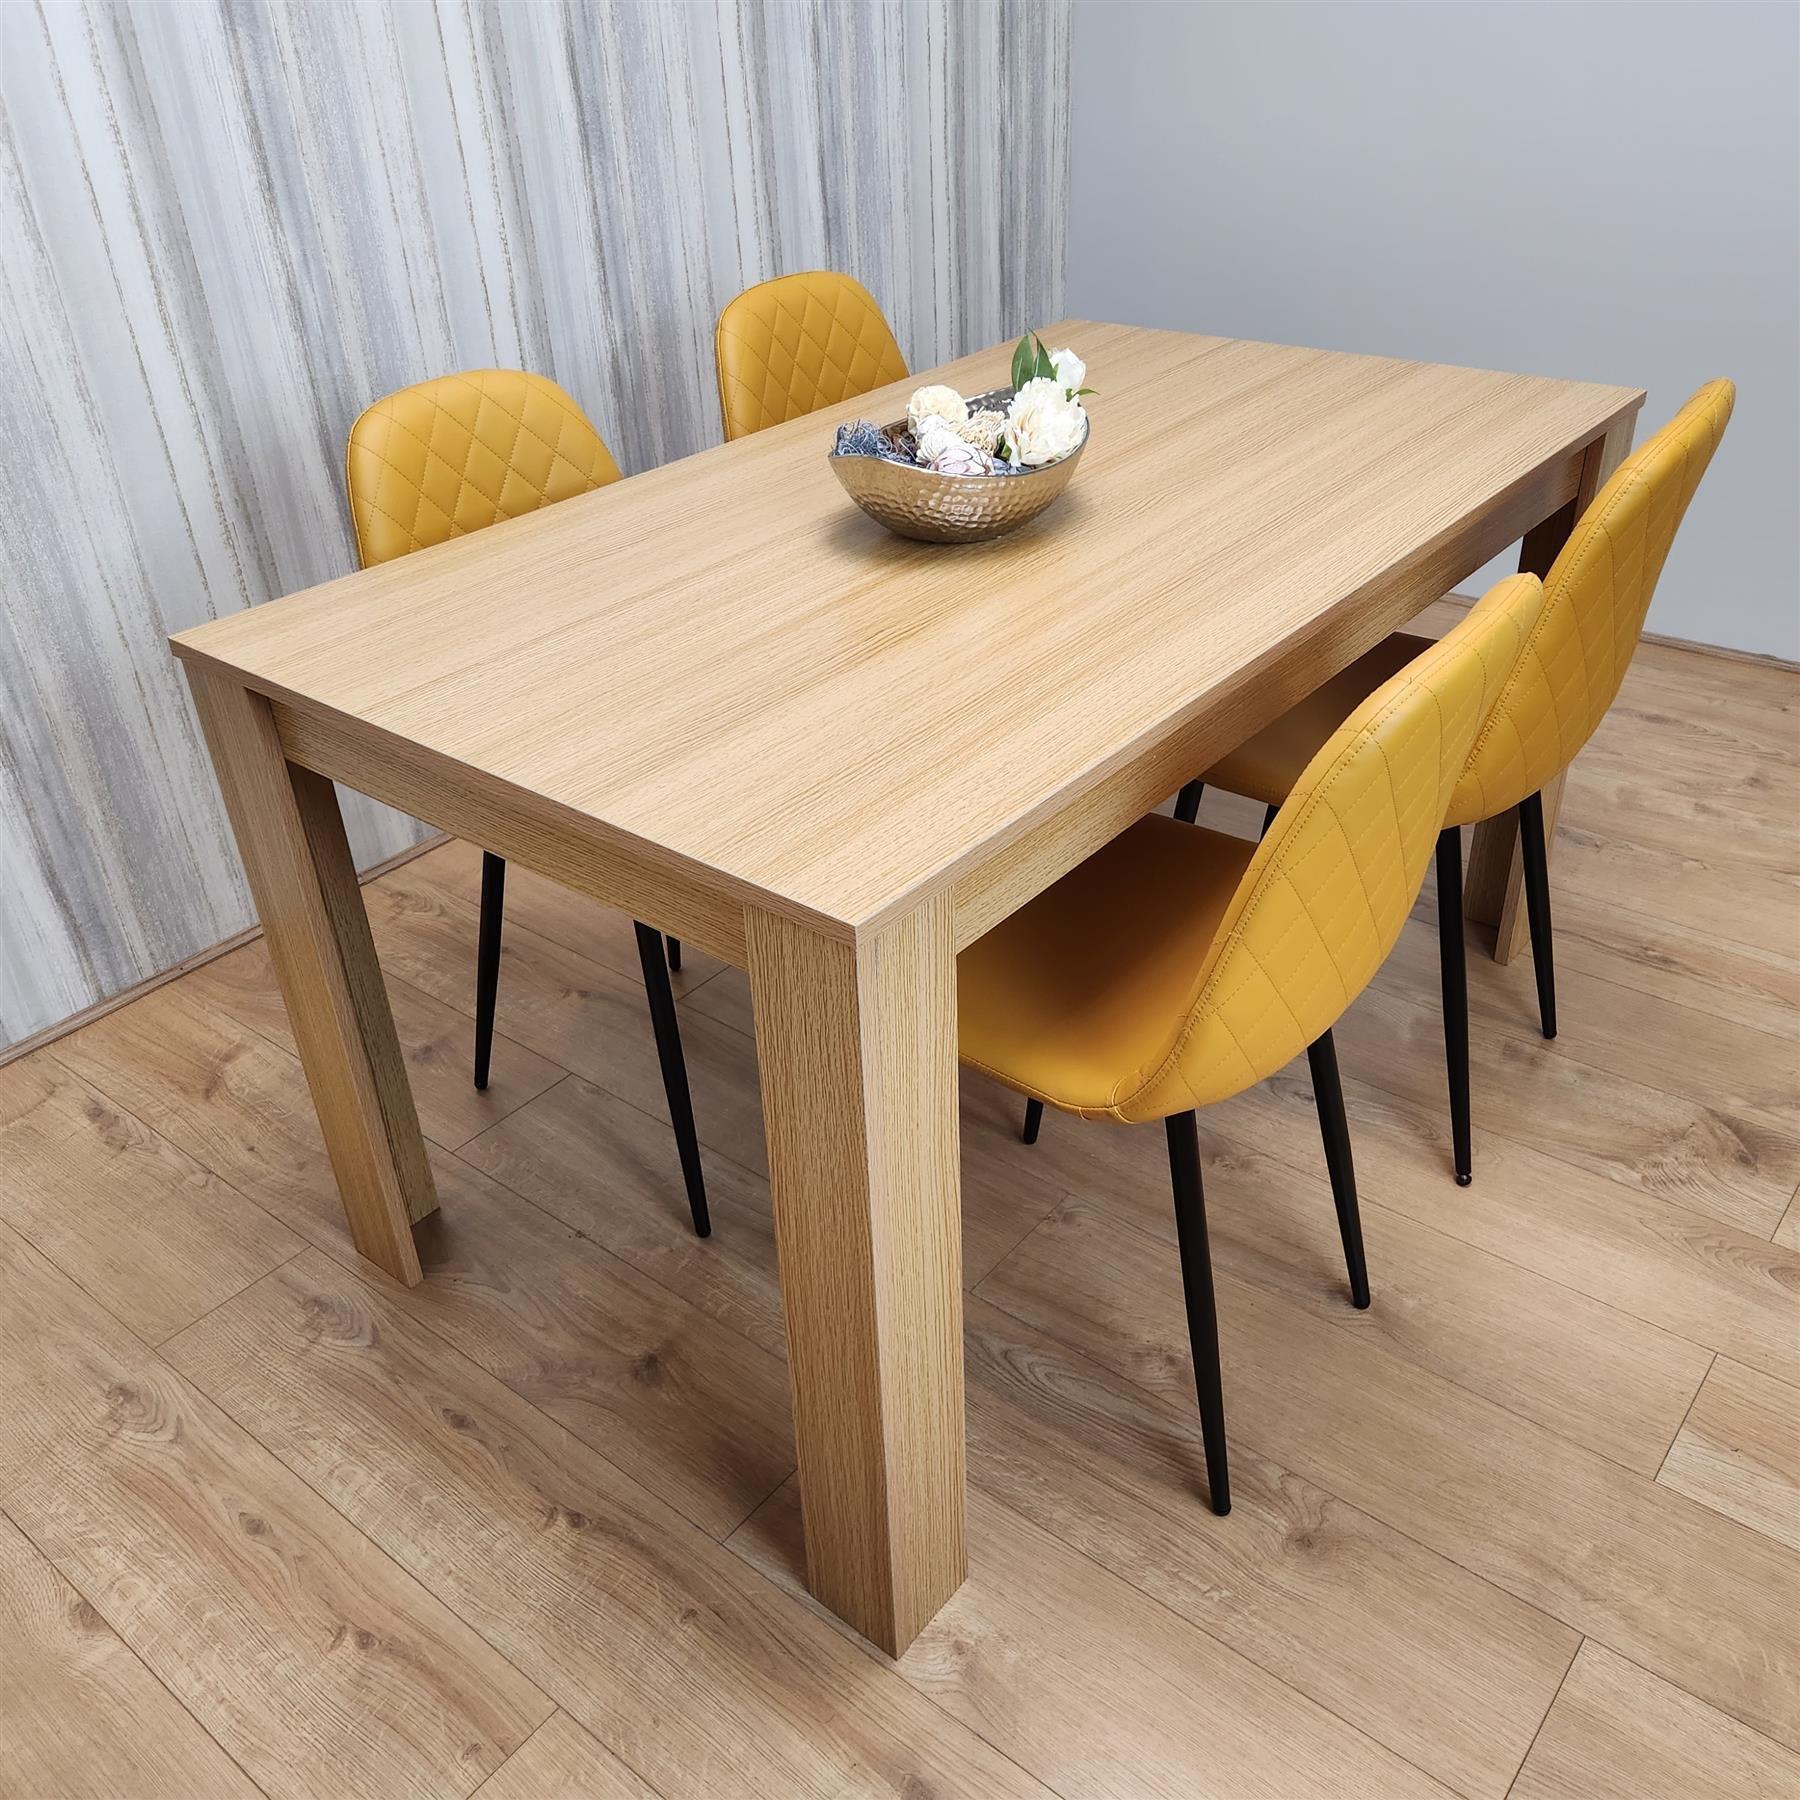 Dining Table and 4 Chairs Oak Effect Table with 4 Mustard Gem Patterned Chairs